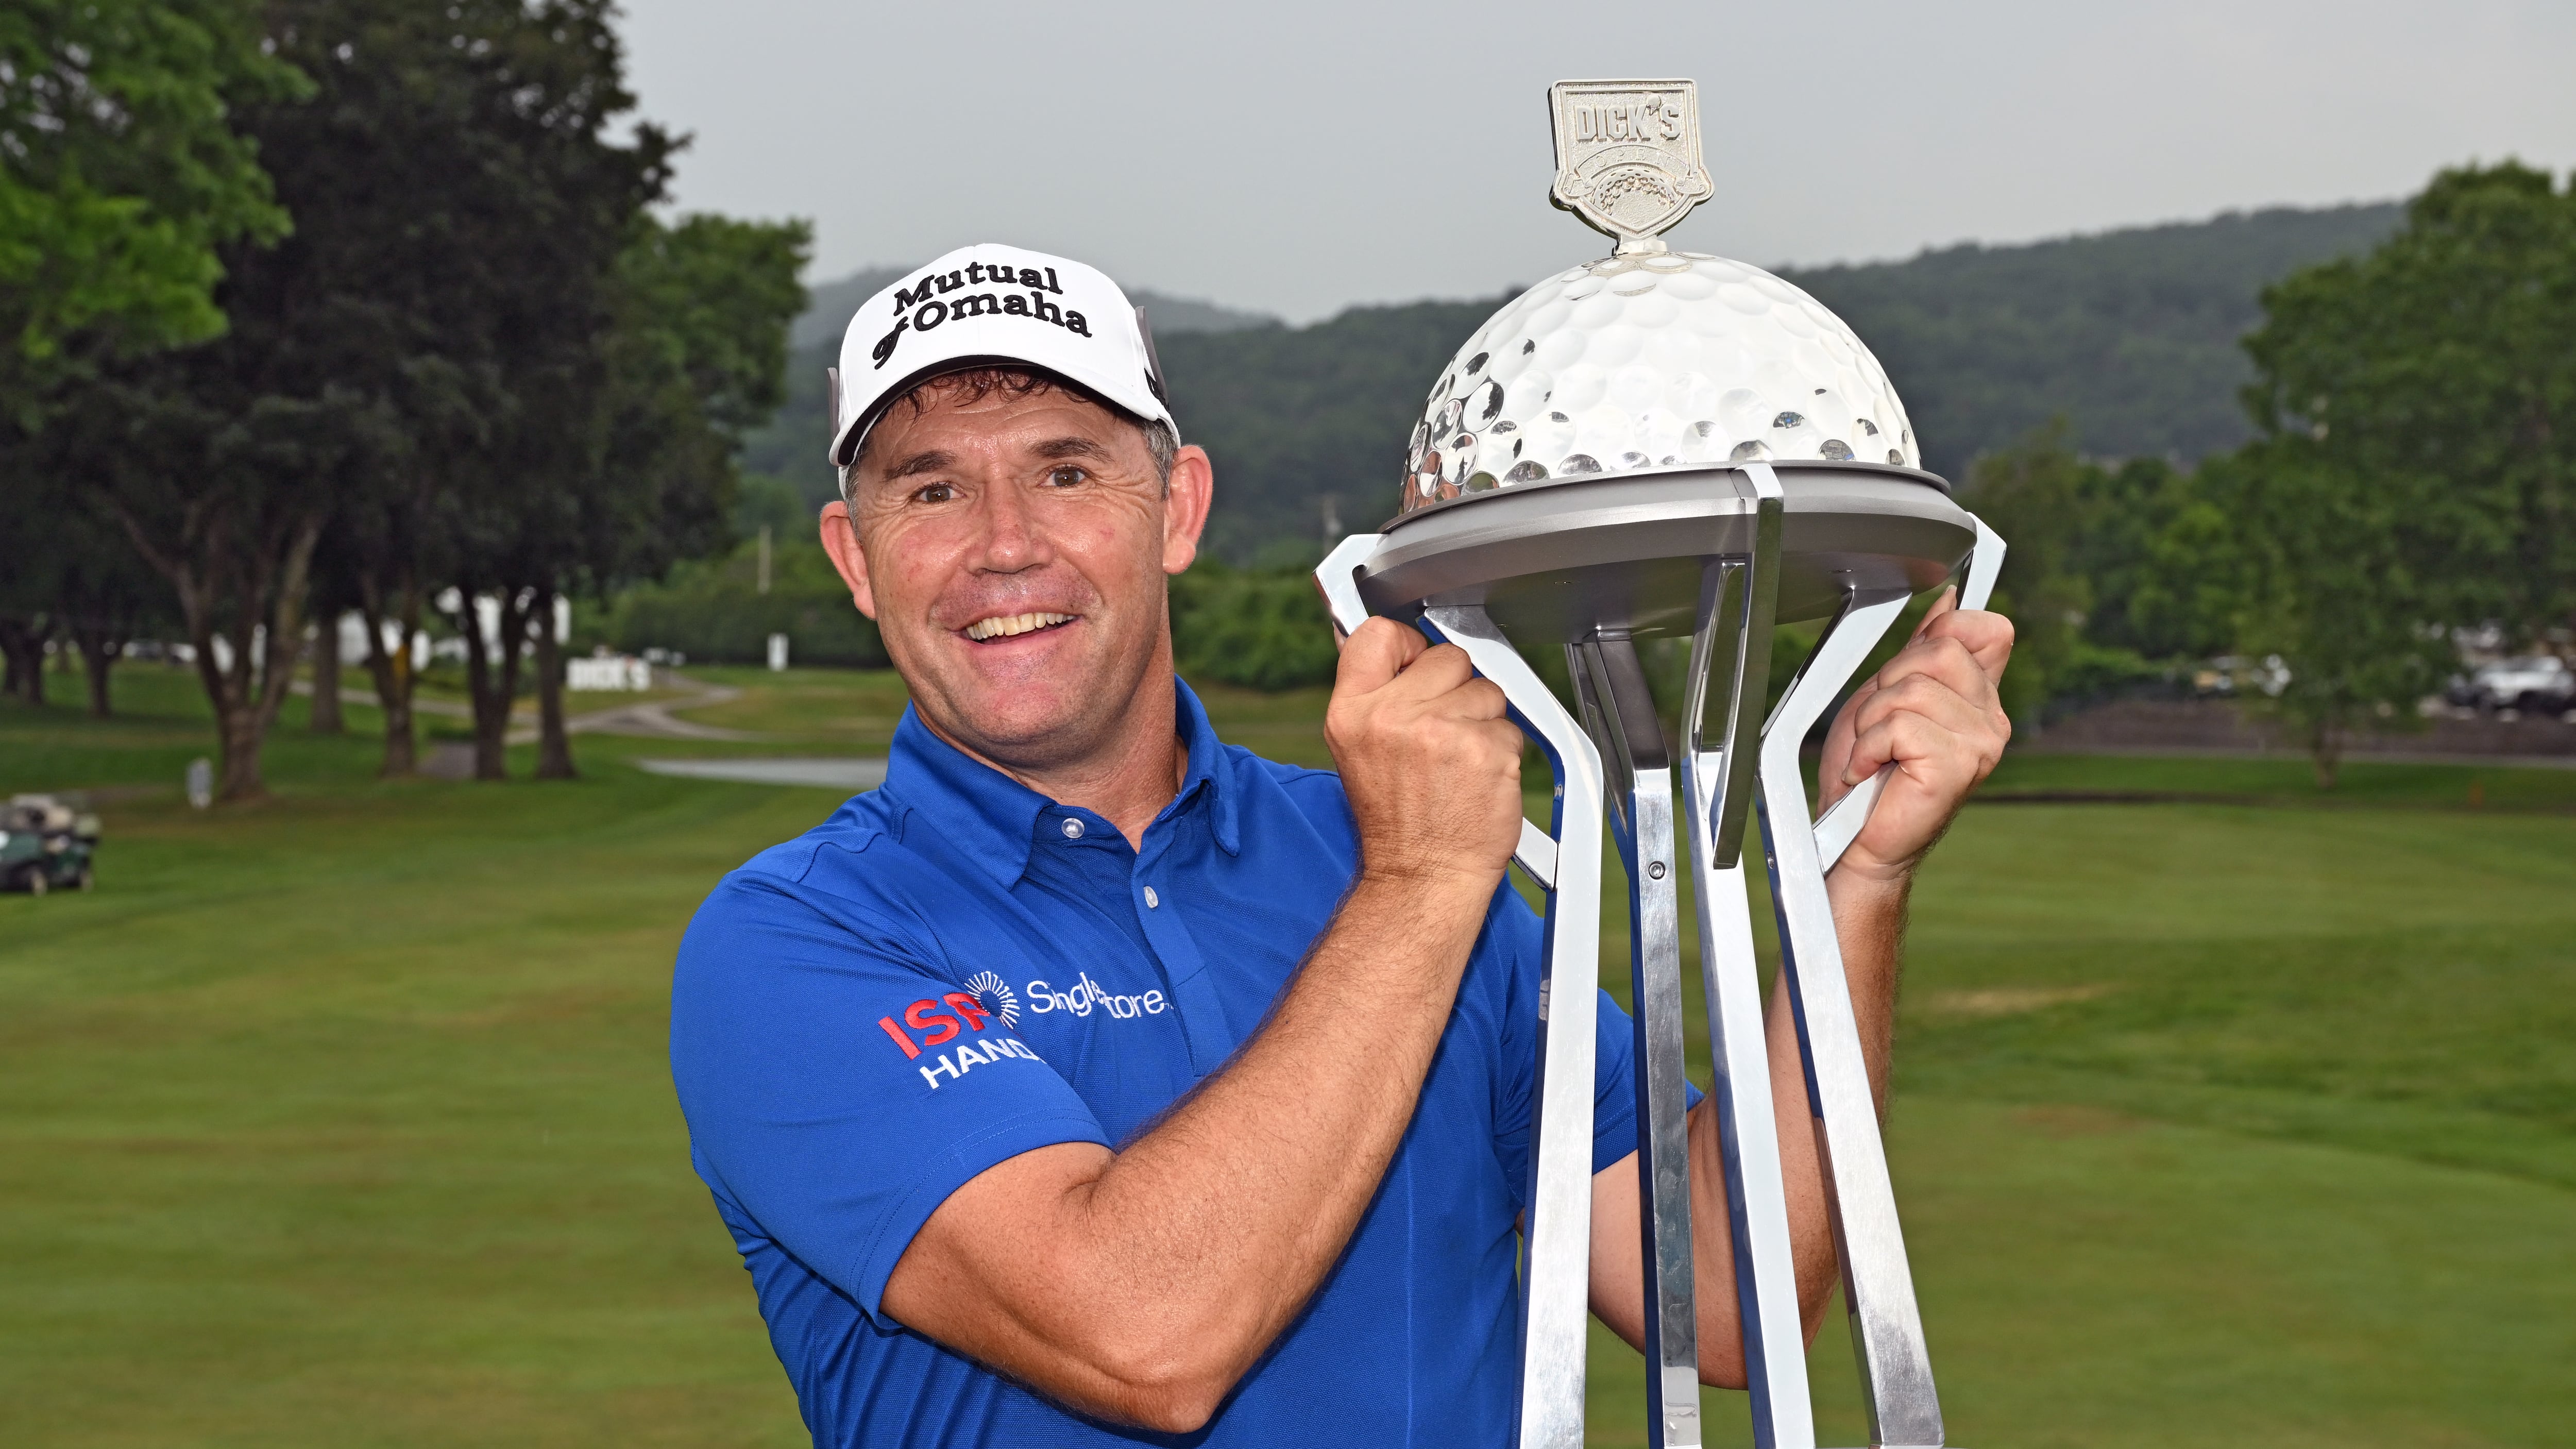 ENDICOTT, NEW YORK - JUNE 23: Padraig Harrington of Ireland holds the trophy after winning the final round of the DICK'S Sporting Goods Open at En-Joie Golf Club on June 23, 2024 in Endicott, New York. (Photo by Drew Hallowell/Getty Images)